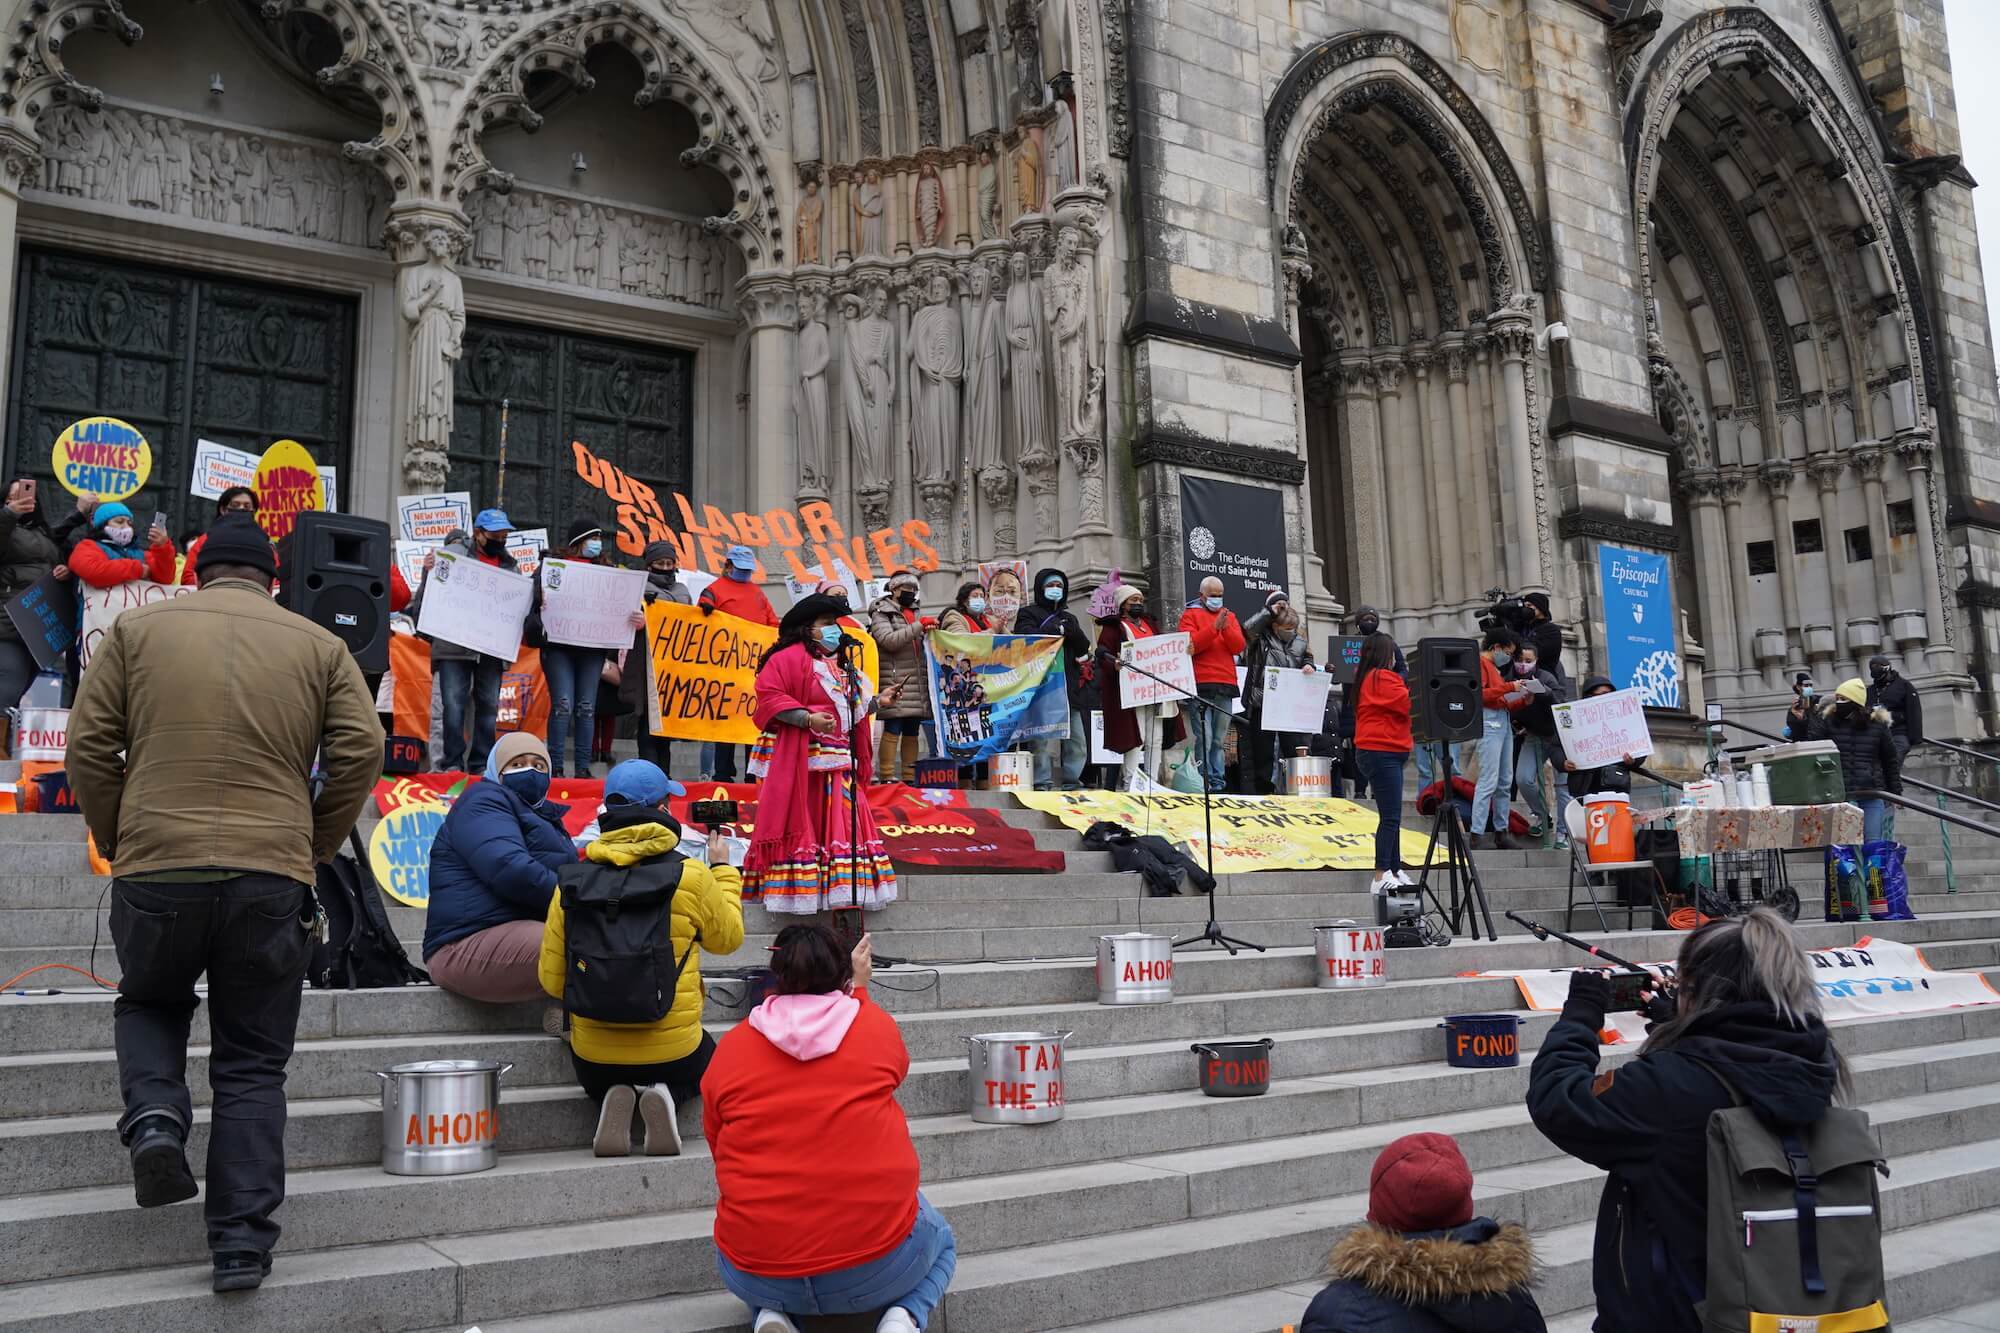 Protestors stand with posters and signs in Manhattan's Morningside Heights outside of the Cathedral Church of St. John the Divine. March 16, 2021